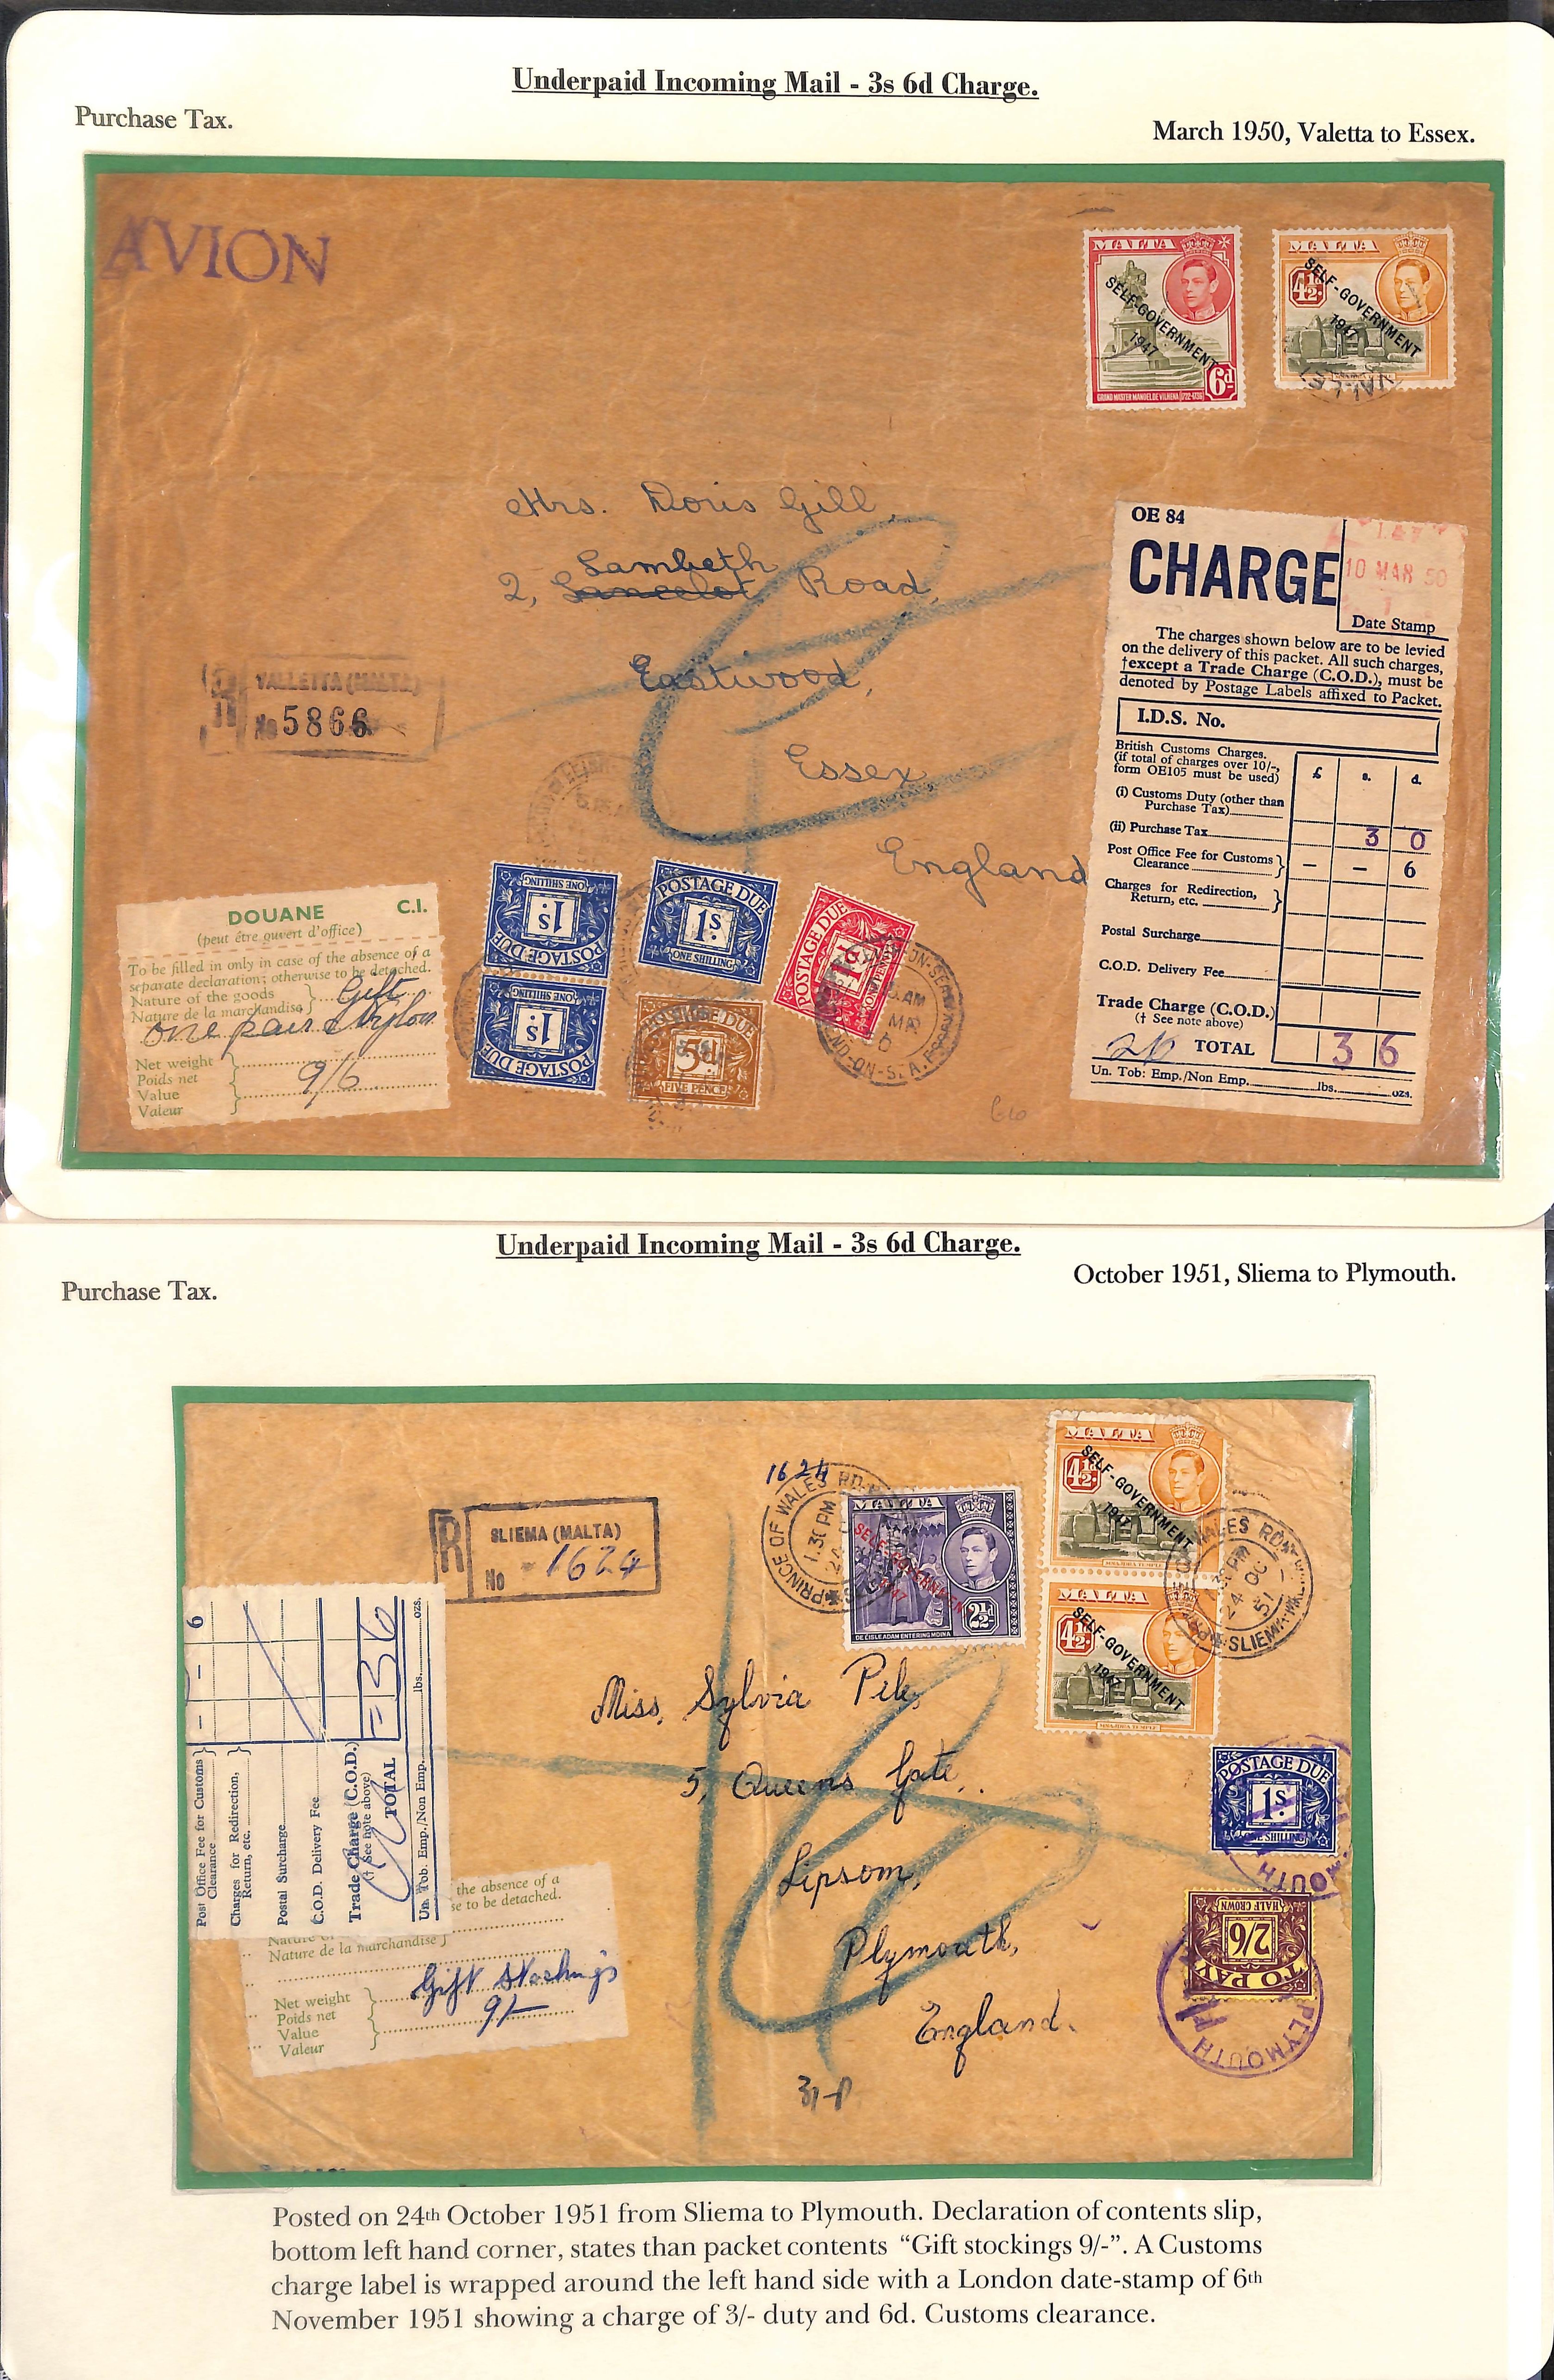 Customs Charges/Accumulated Charges. 1938-92 Covers or parcel address panels with customs duty or - Image 16 of 18